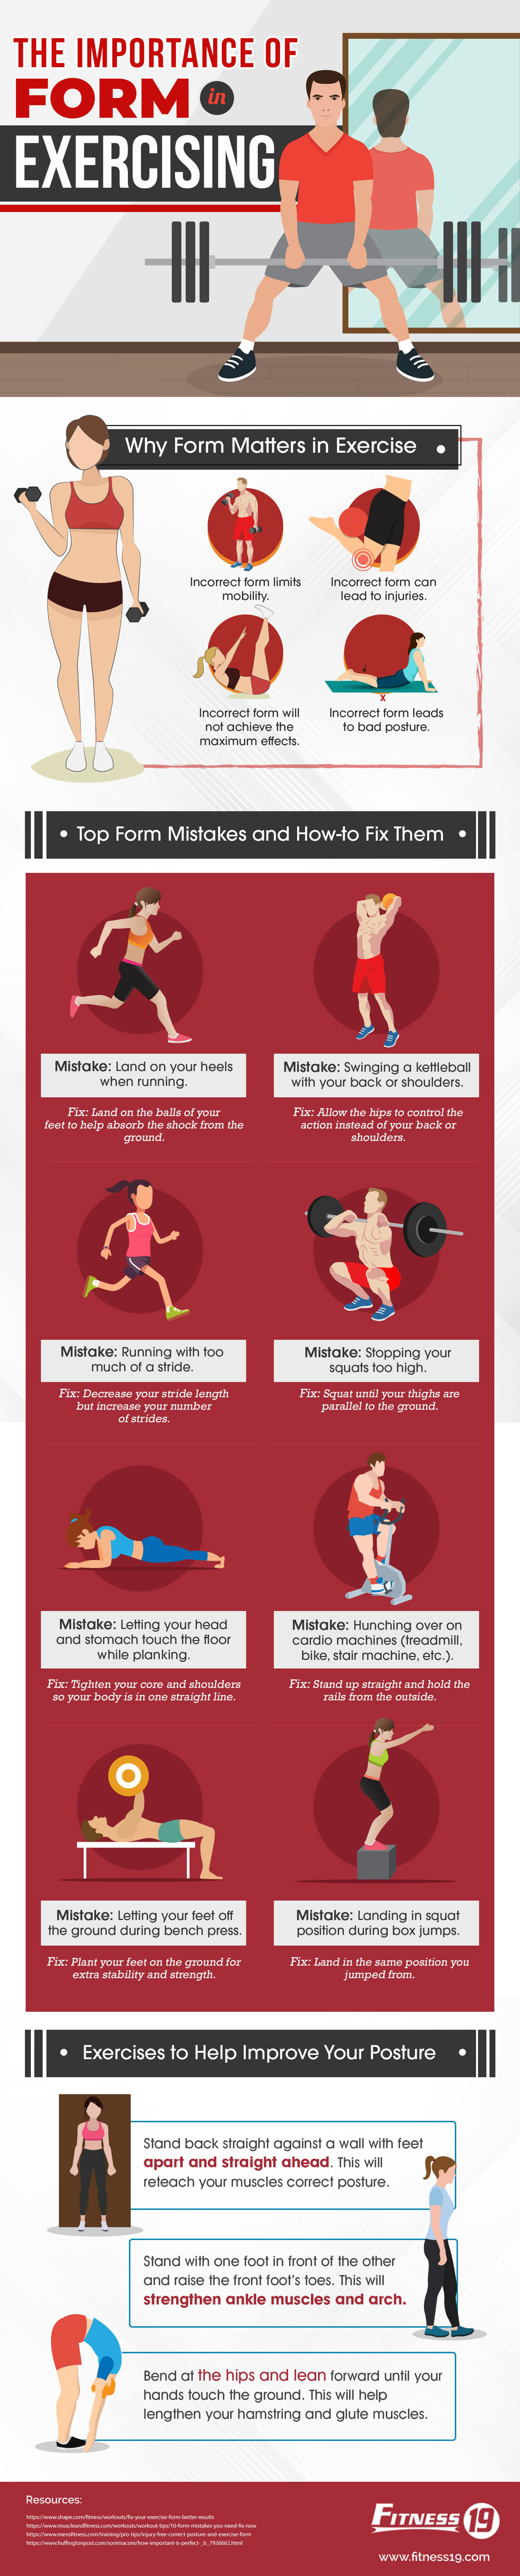 The Importance of Form In Exercising